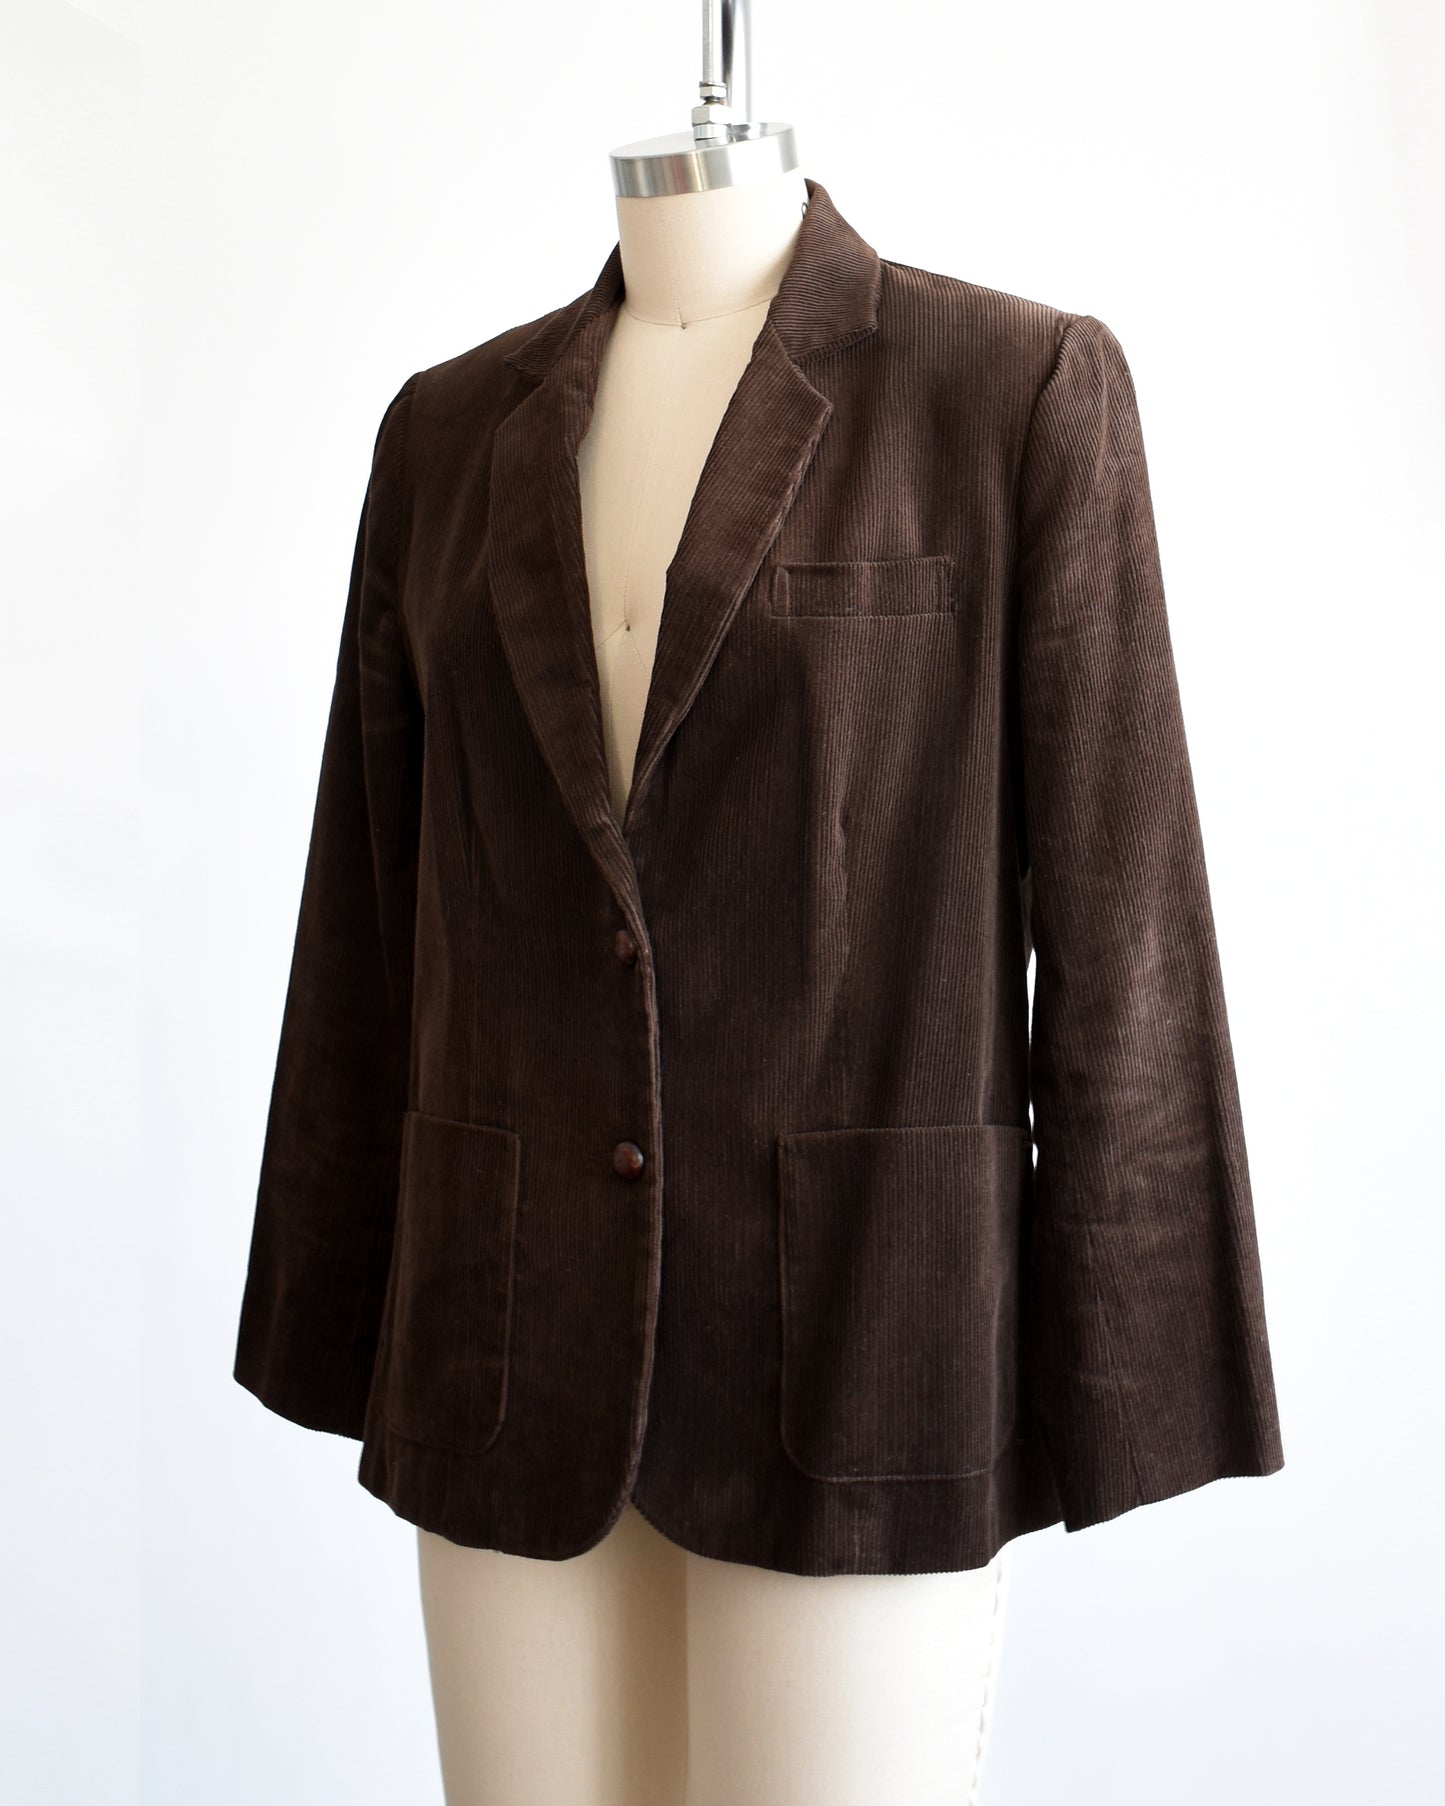 Side front view of a vintage 1970s chocolate brown corduroy blazer features two faux wood plastic buttons on the front and two smaller matching buttons on the cuffs.